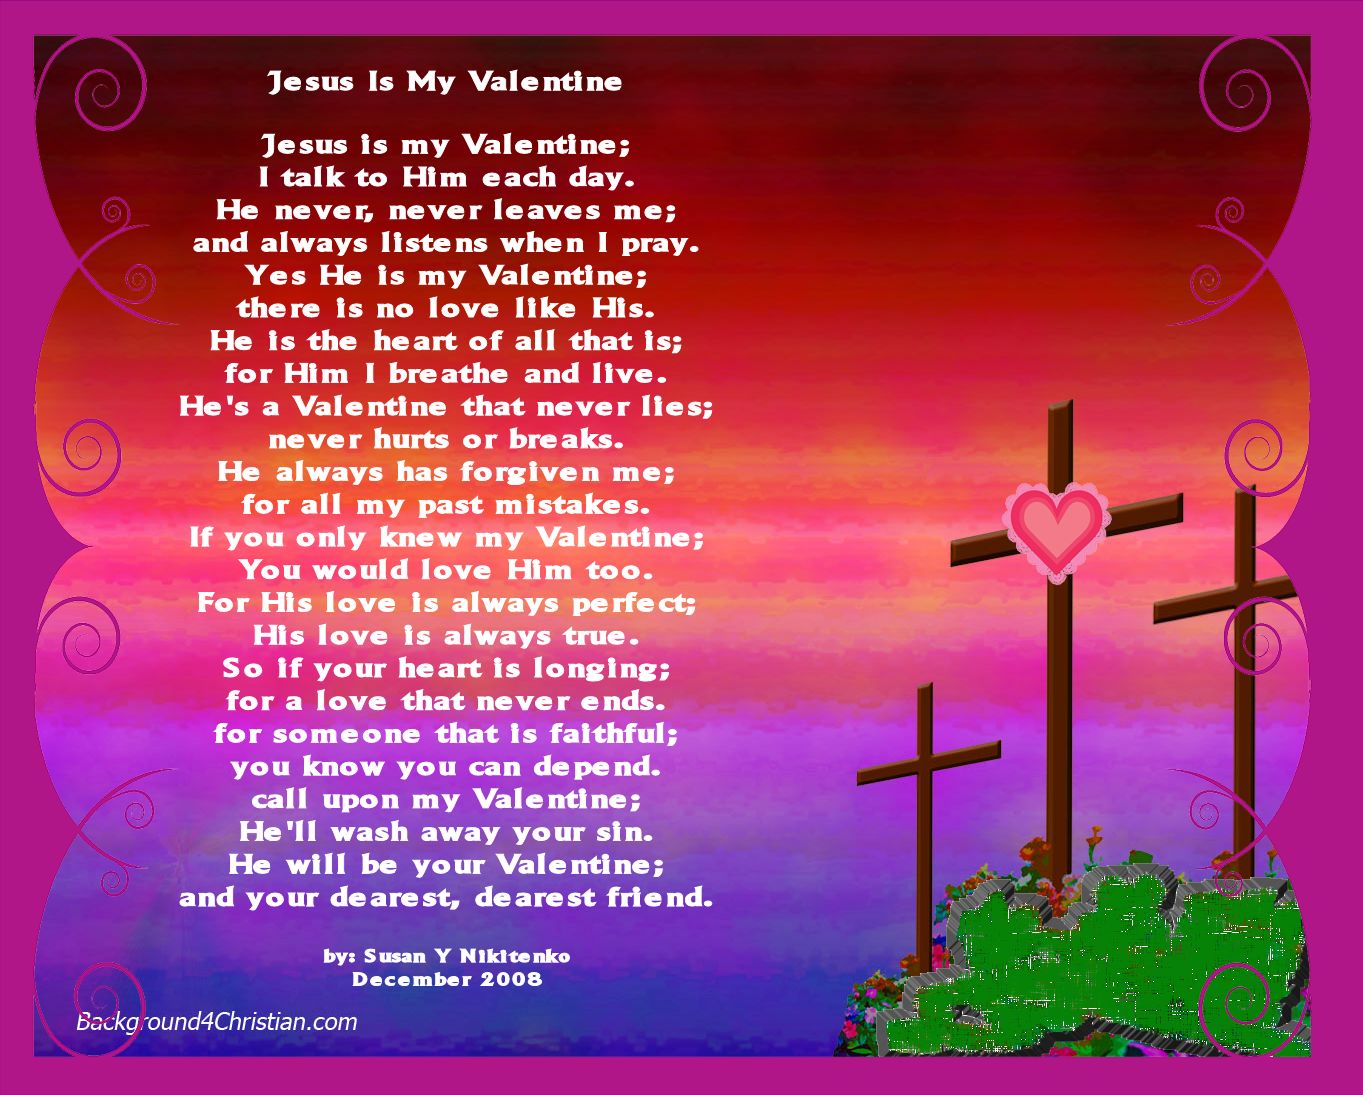 Christian Images In My Treasure Box  Jesus Is My Valentine Poster